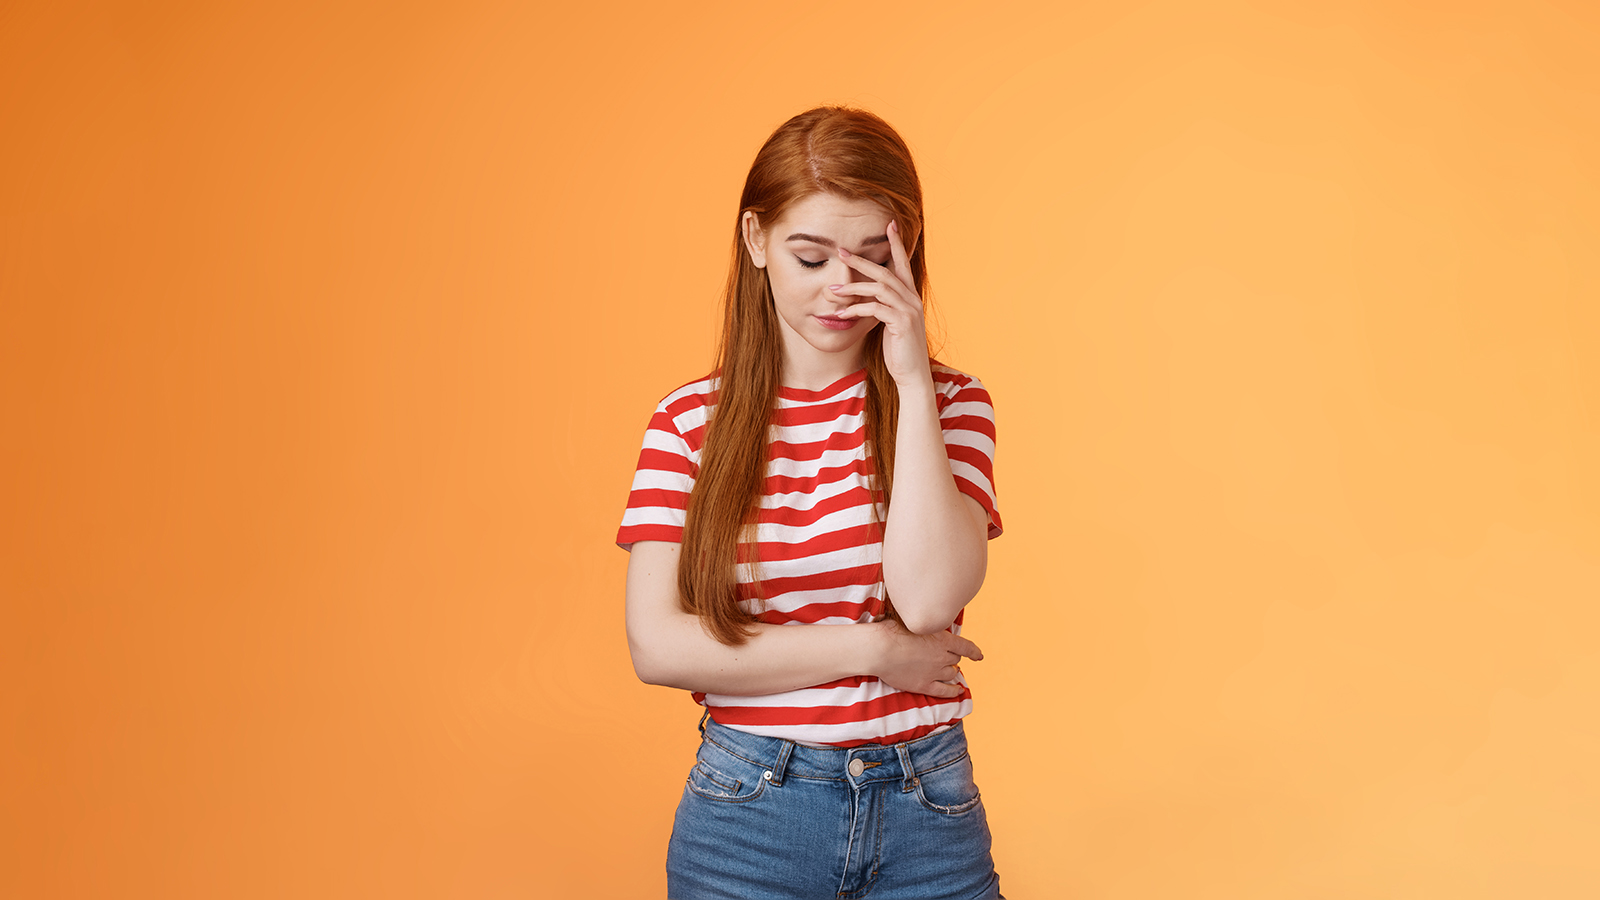 Annoyed redhead woman fed up listening stupid nonsense, close eyes tired, make face palm embarrassed uninterested, feel uneasy distressed, exhausted useless argument, irritated orange background.